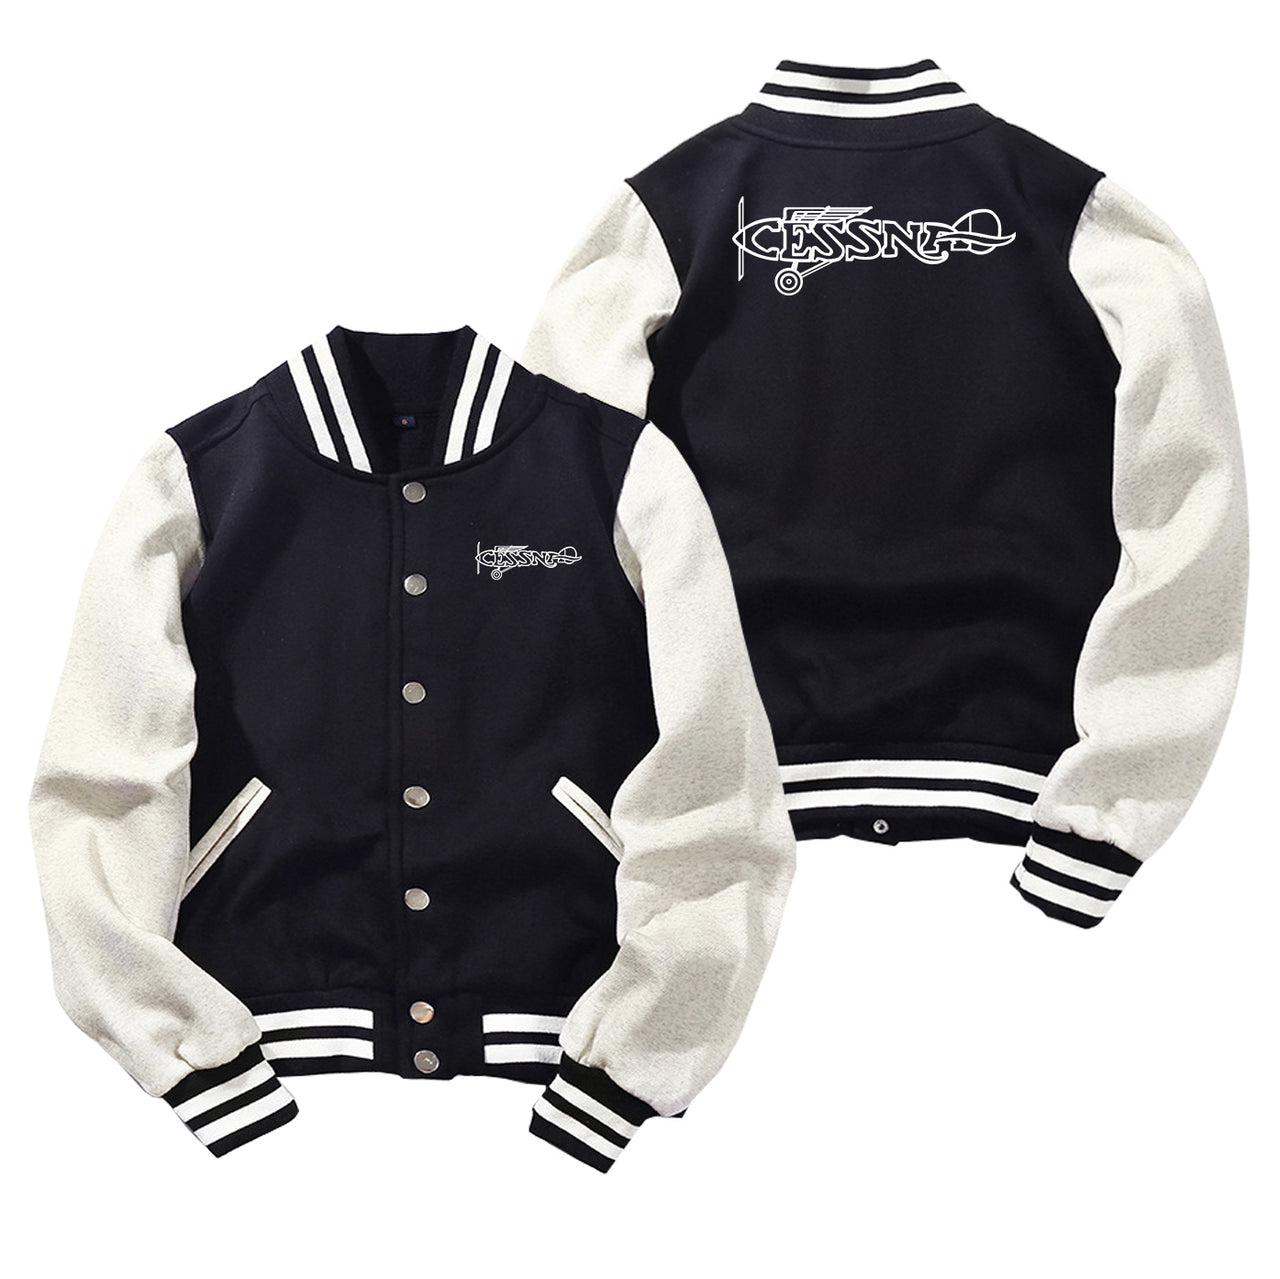 Special Cessna Text Designed Baseball Style Jackets